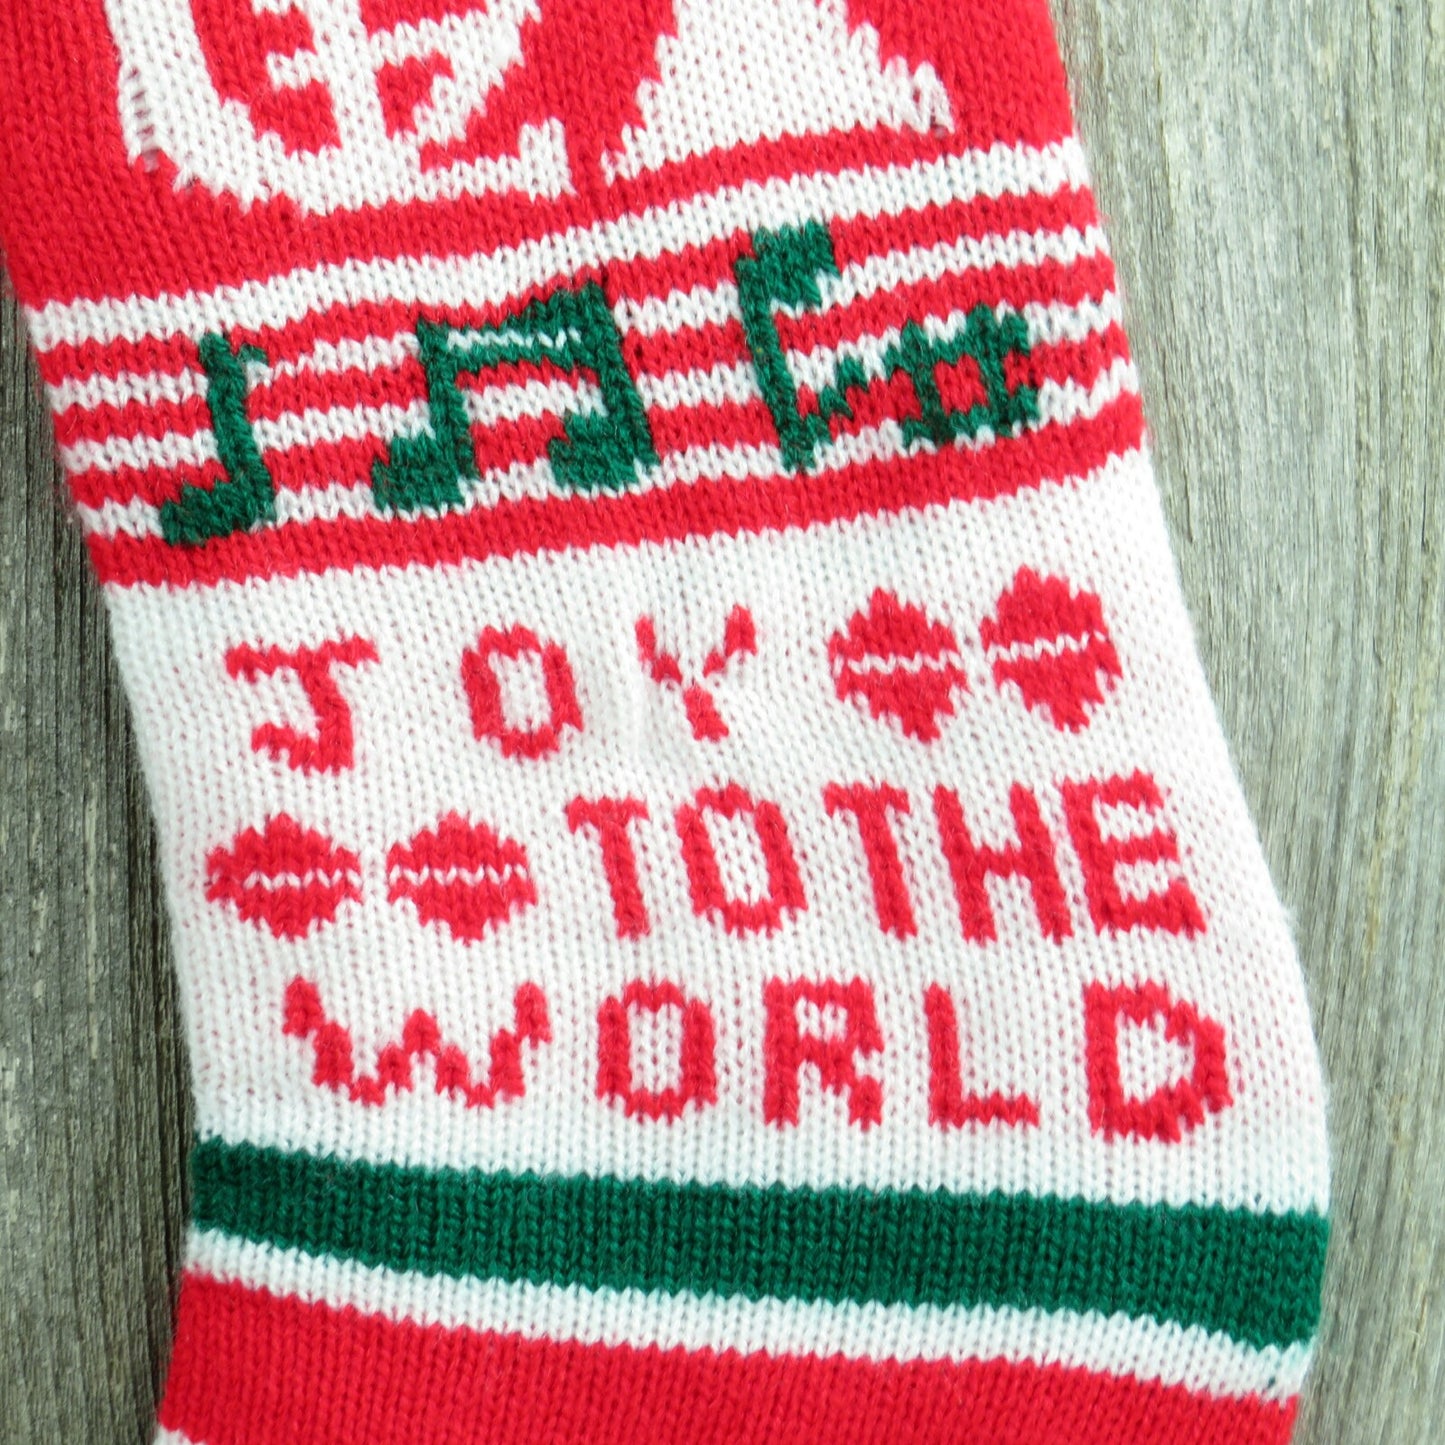 Vintage Knit Music Stocking Horns Christmas Red White Joy To The World Notes Holiday Decor 1980s - At Grandma's Table